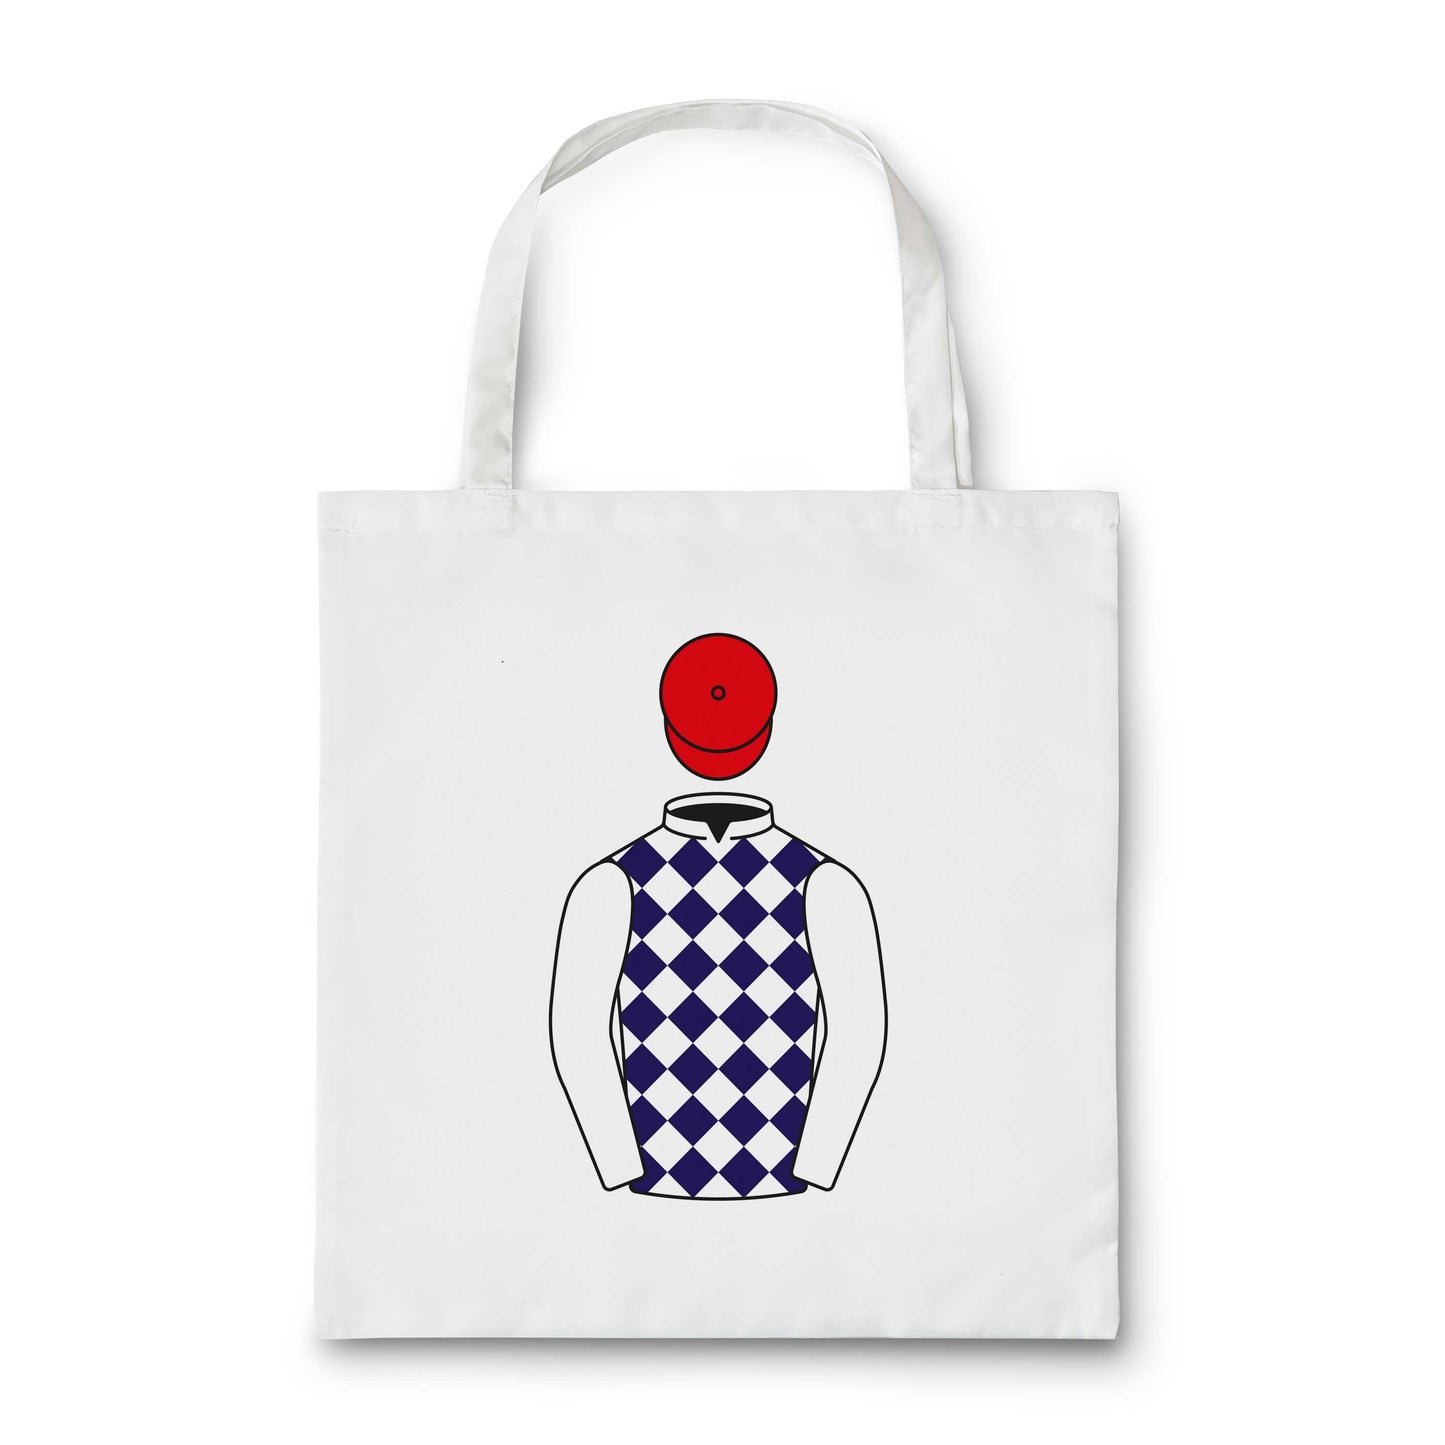 R A Bartlett Tote Bag - Tote Bag - Hacked Up